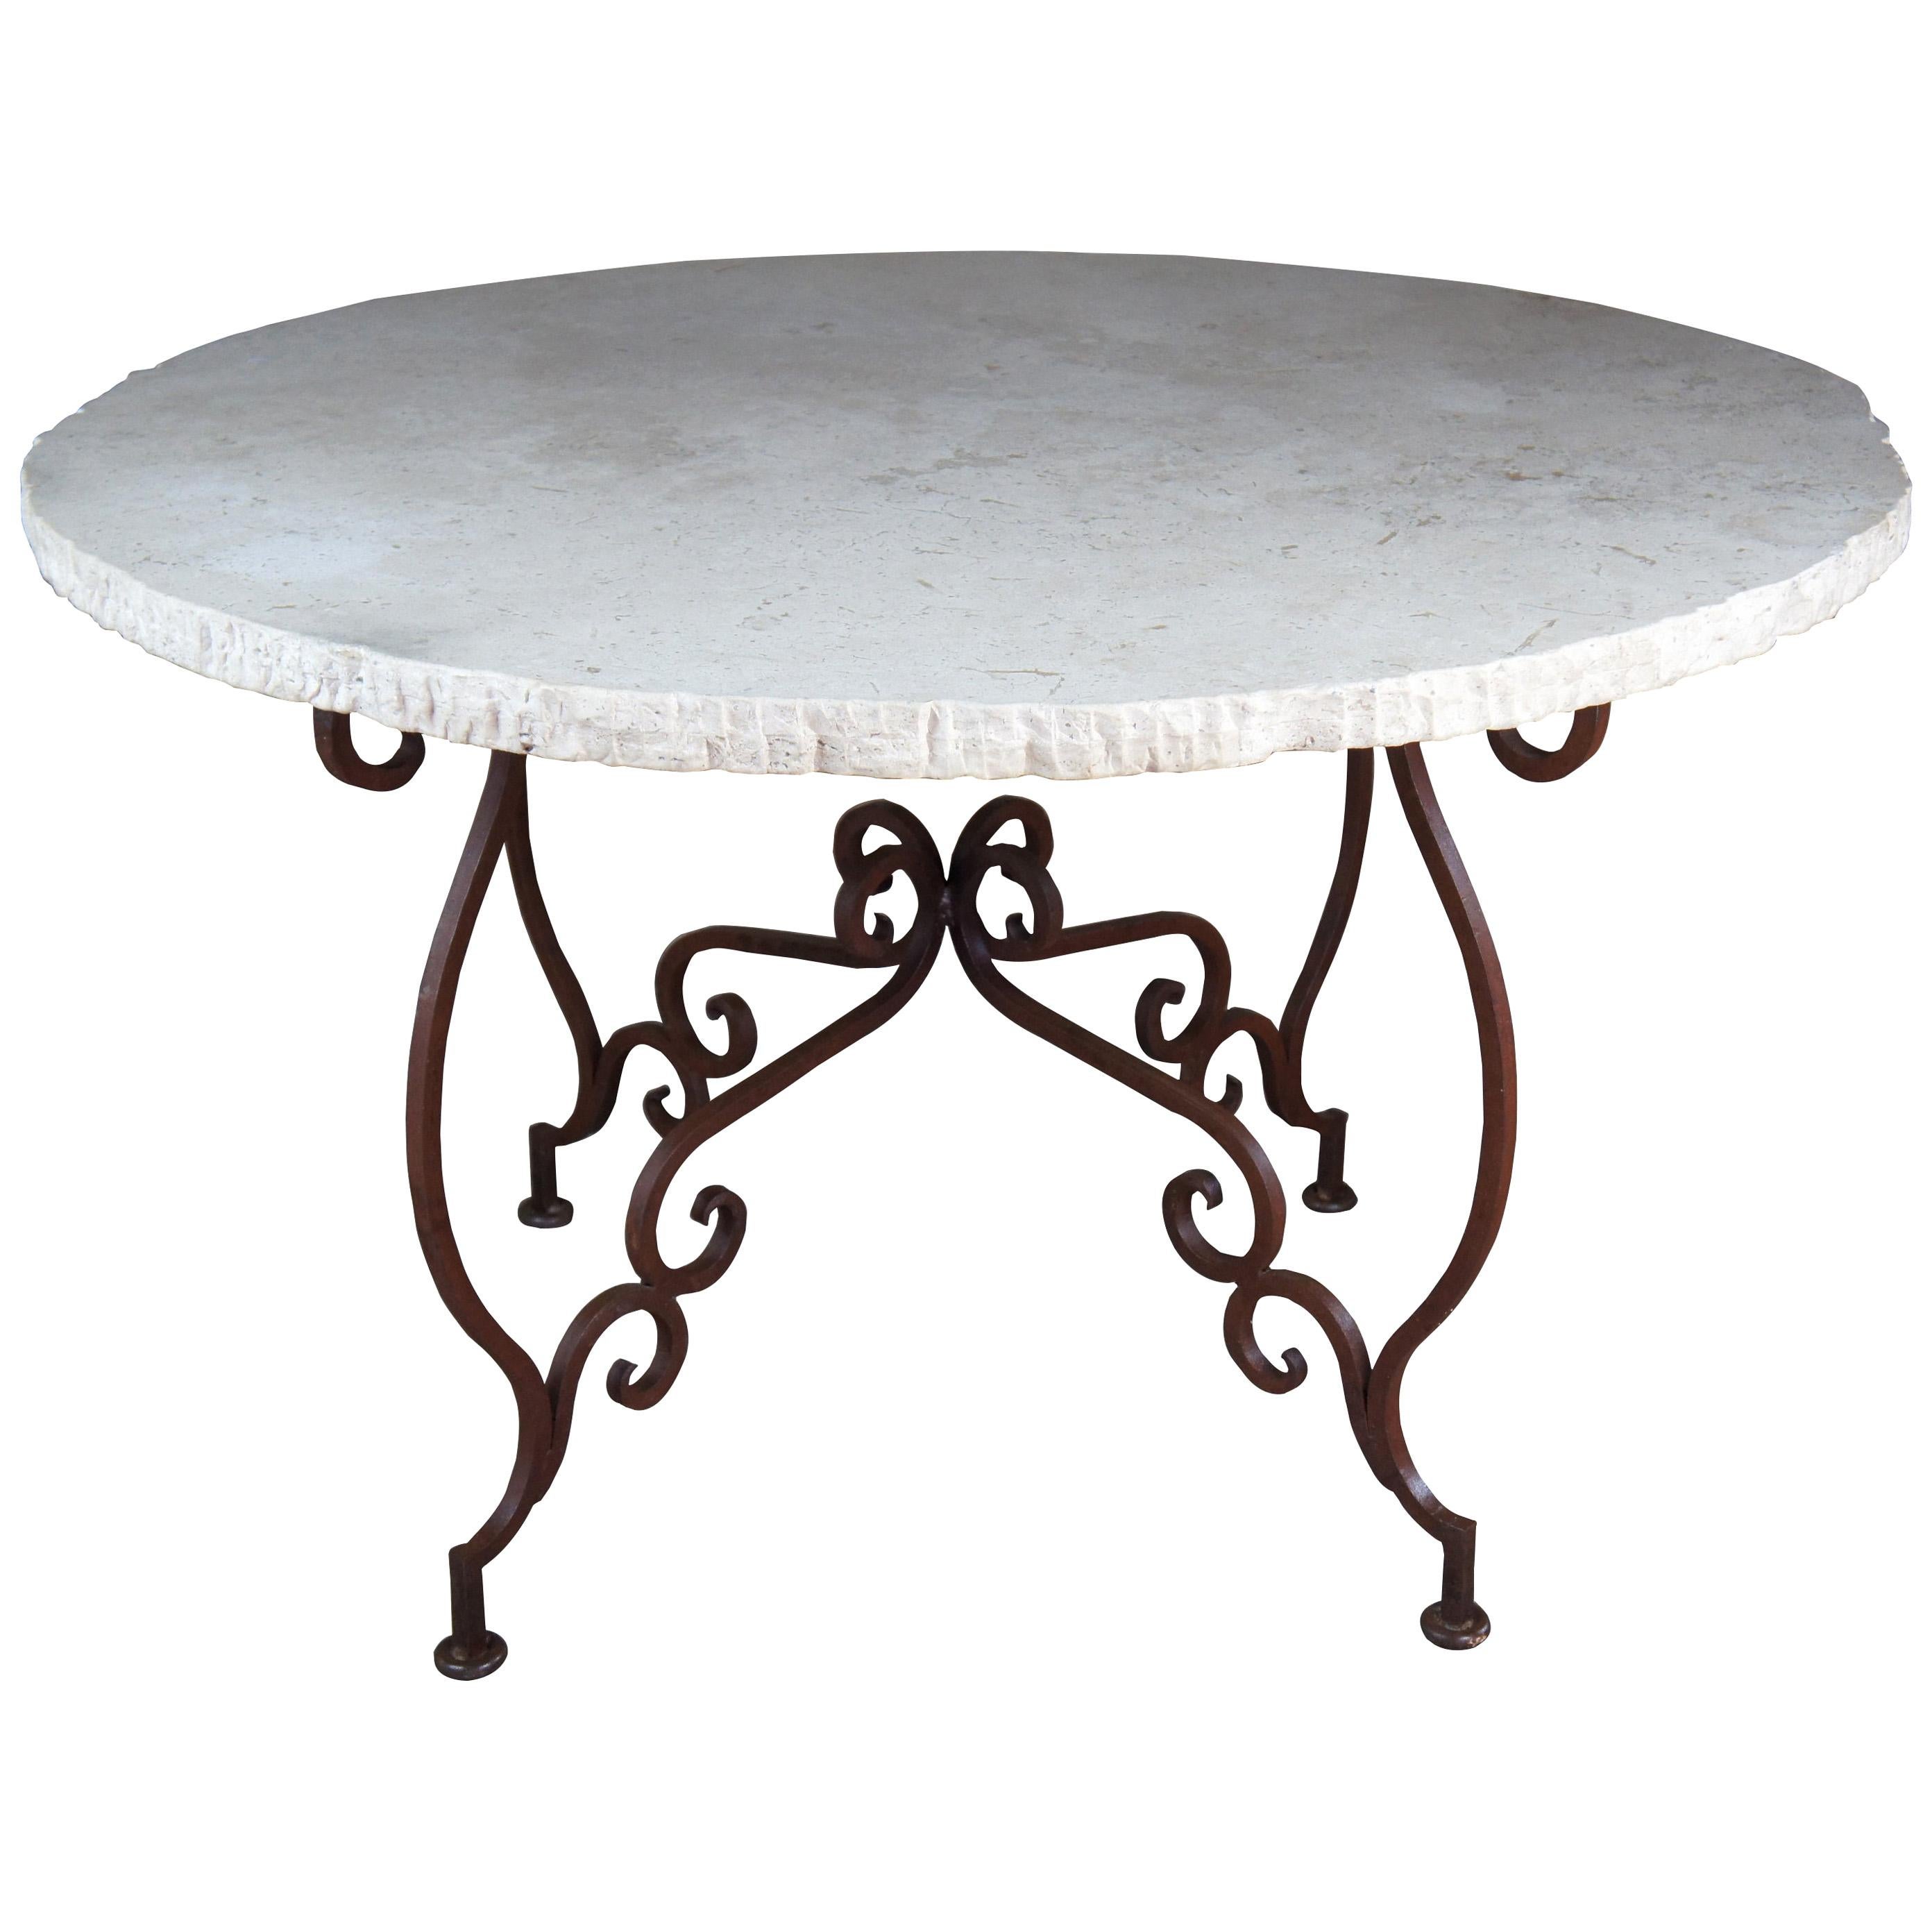 Tuscan Style Scrolled Iron Center Table with Stone Top French Entryway Pedestal